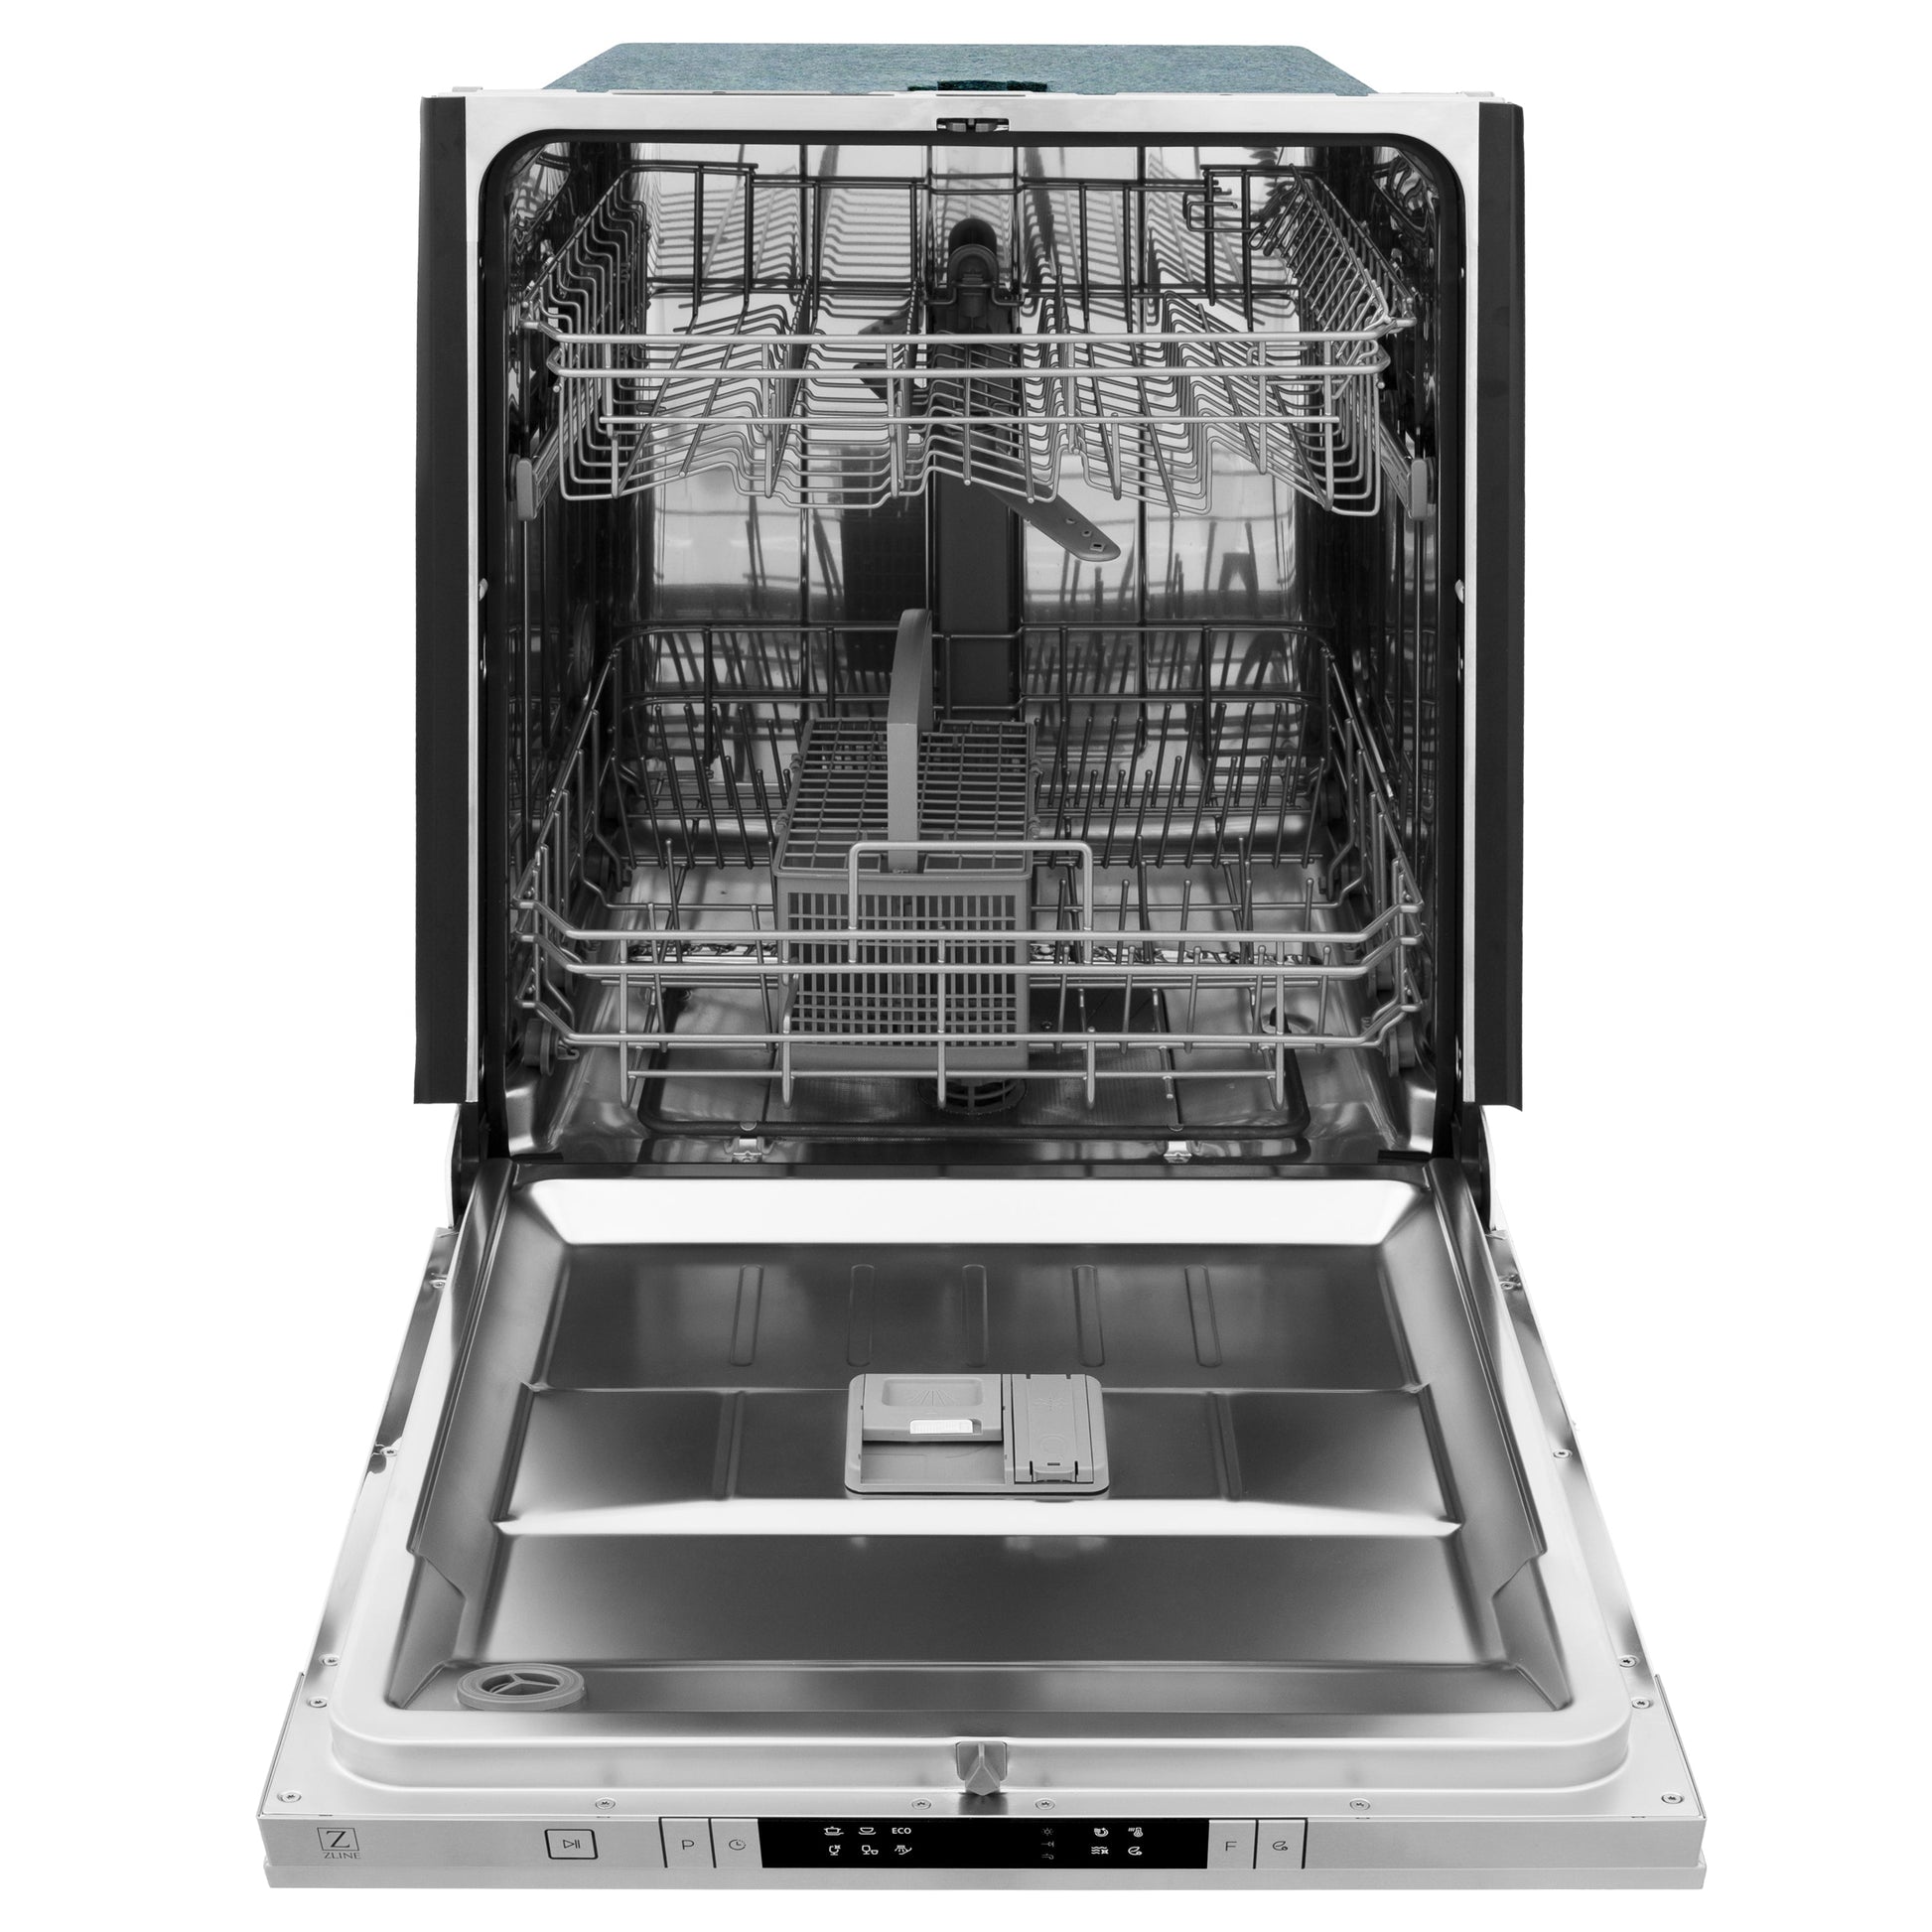 ZLINE 3-Appliance 30" Kitchen Package with Stainless Steel Dual Fuel Range, 30" Over the Range Microwave, and Stainless Steel Dishwasher